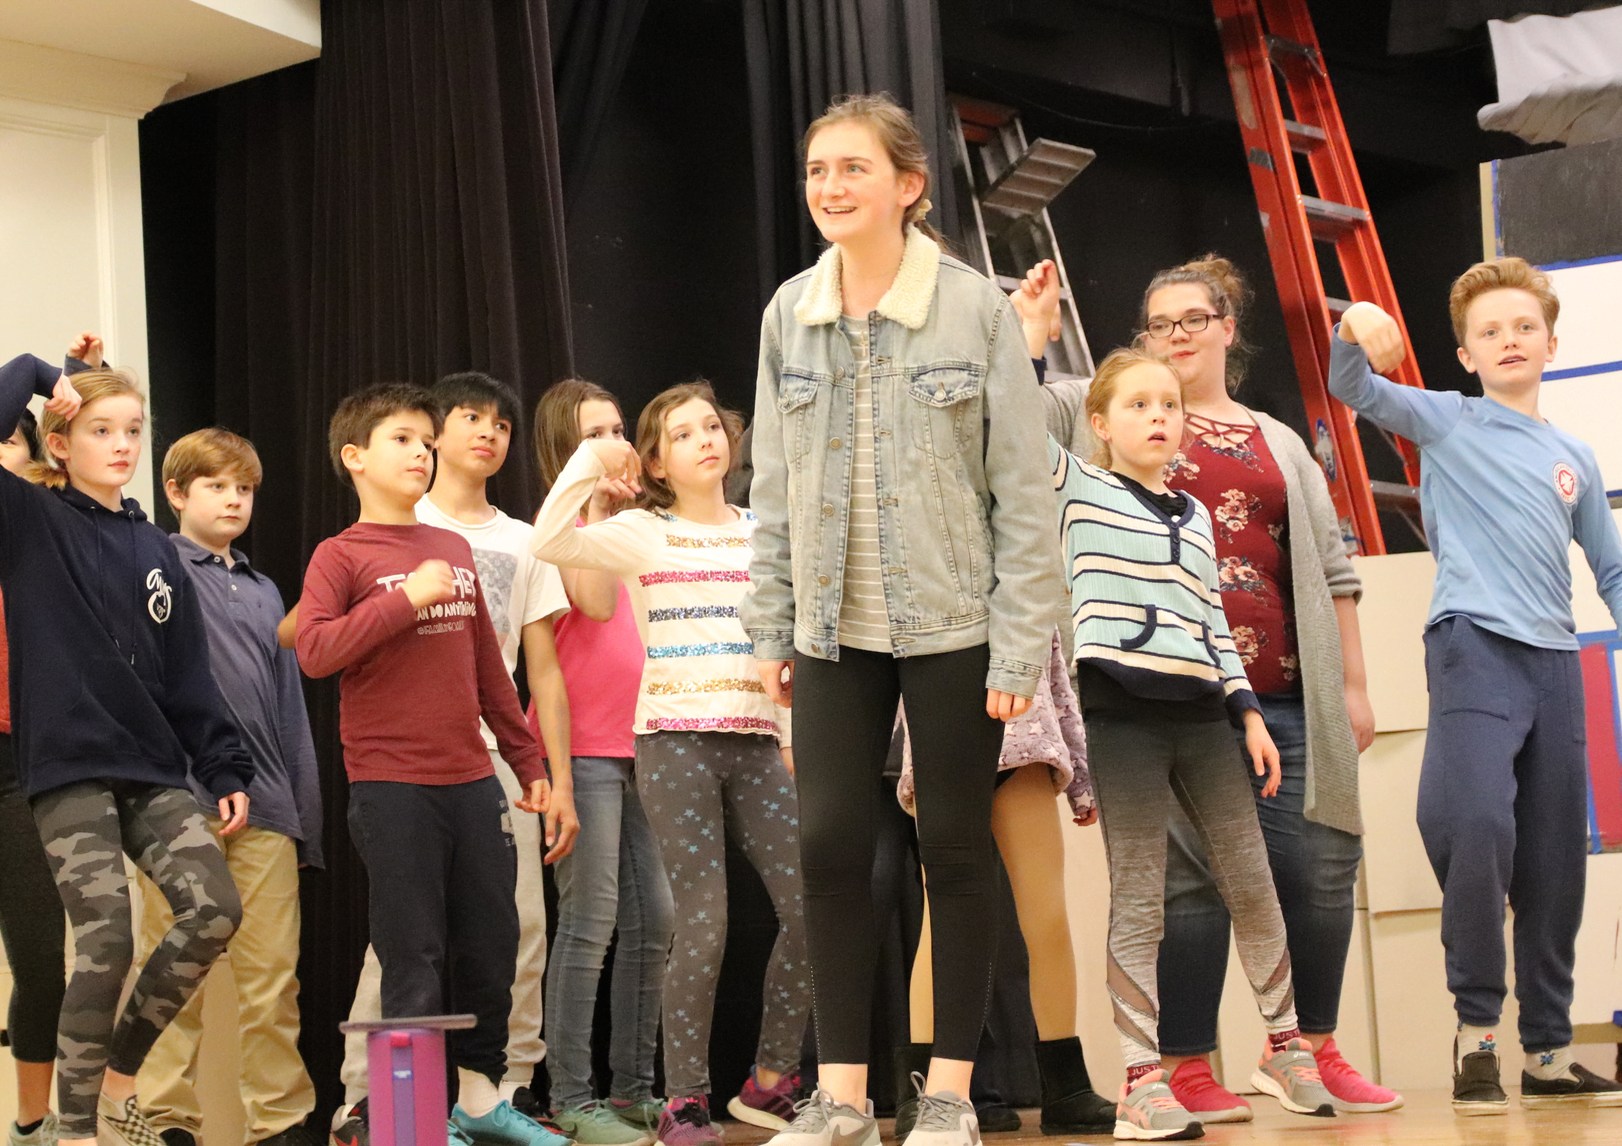 St. Catherine’s Players rehearse for Matilda the Musical. Feb 3, 2020 Photo: Leslie Yager